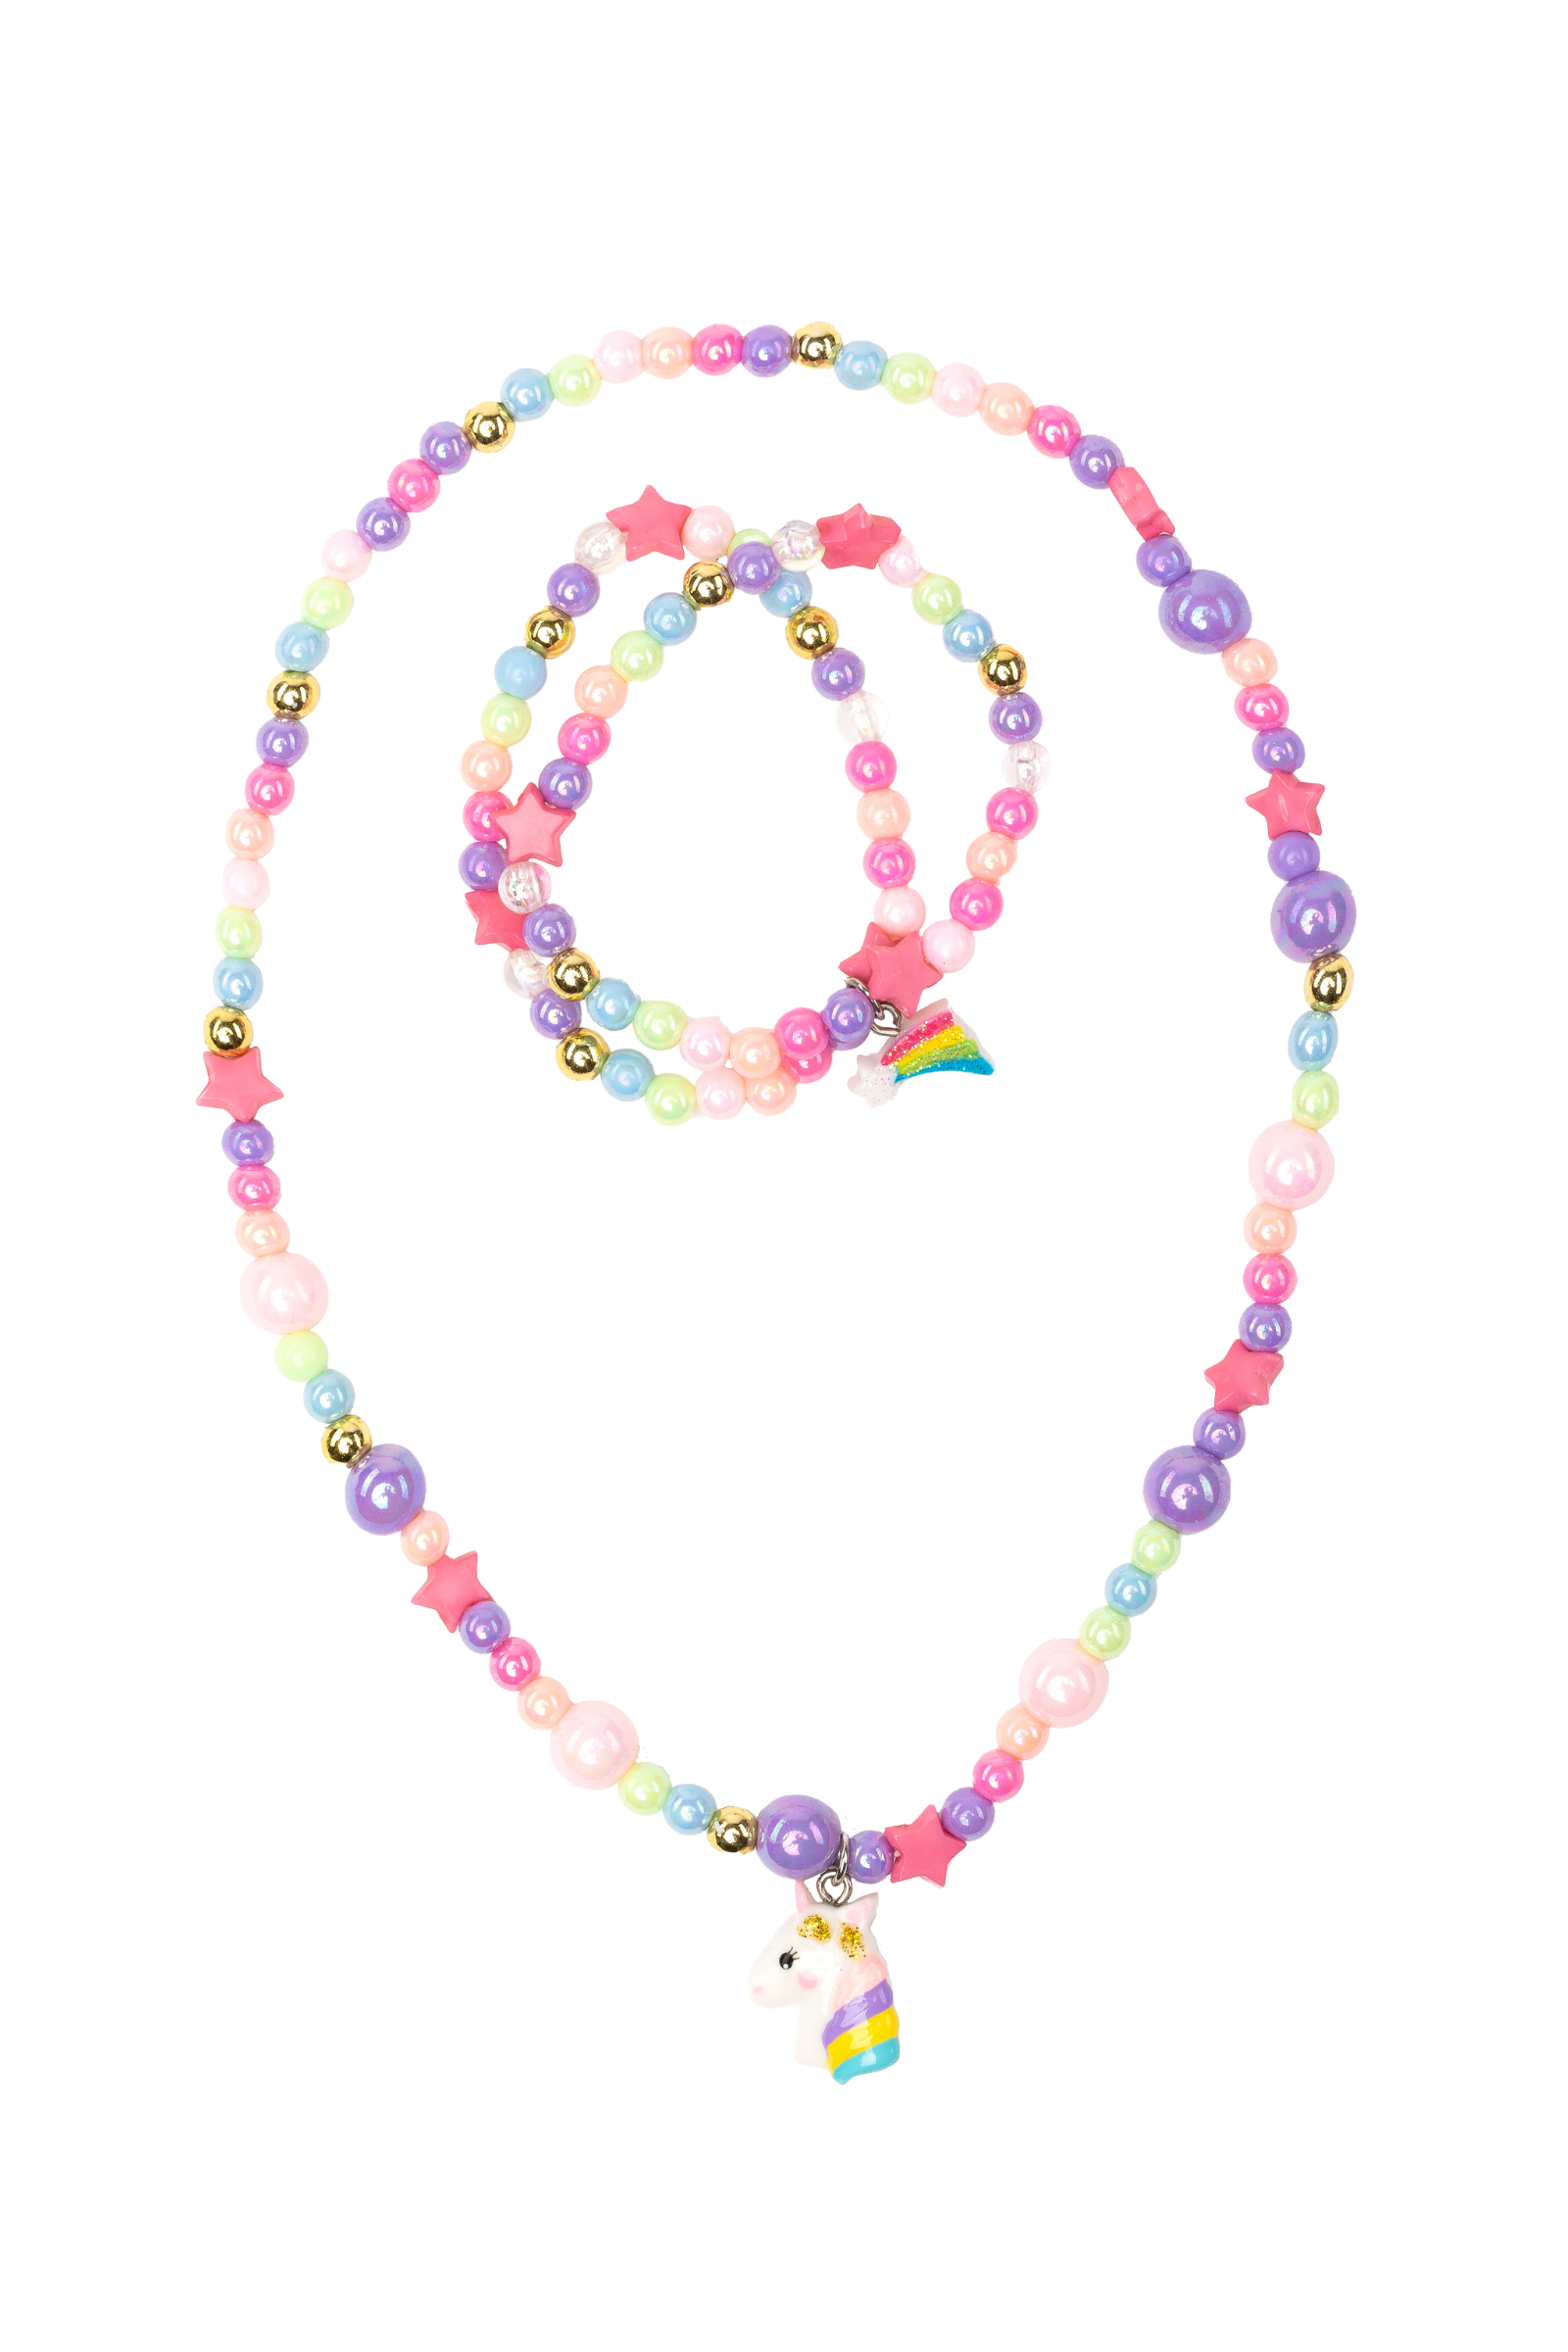 Cheerful Starry Unicorn Necklace & Bracelet by Great Pretenders #86133